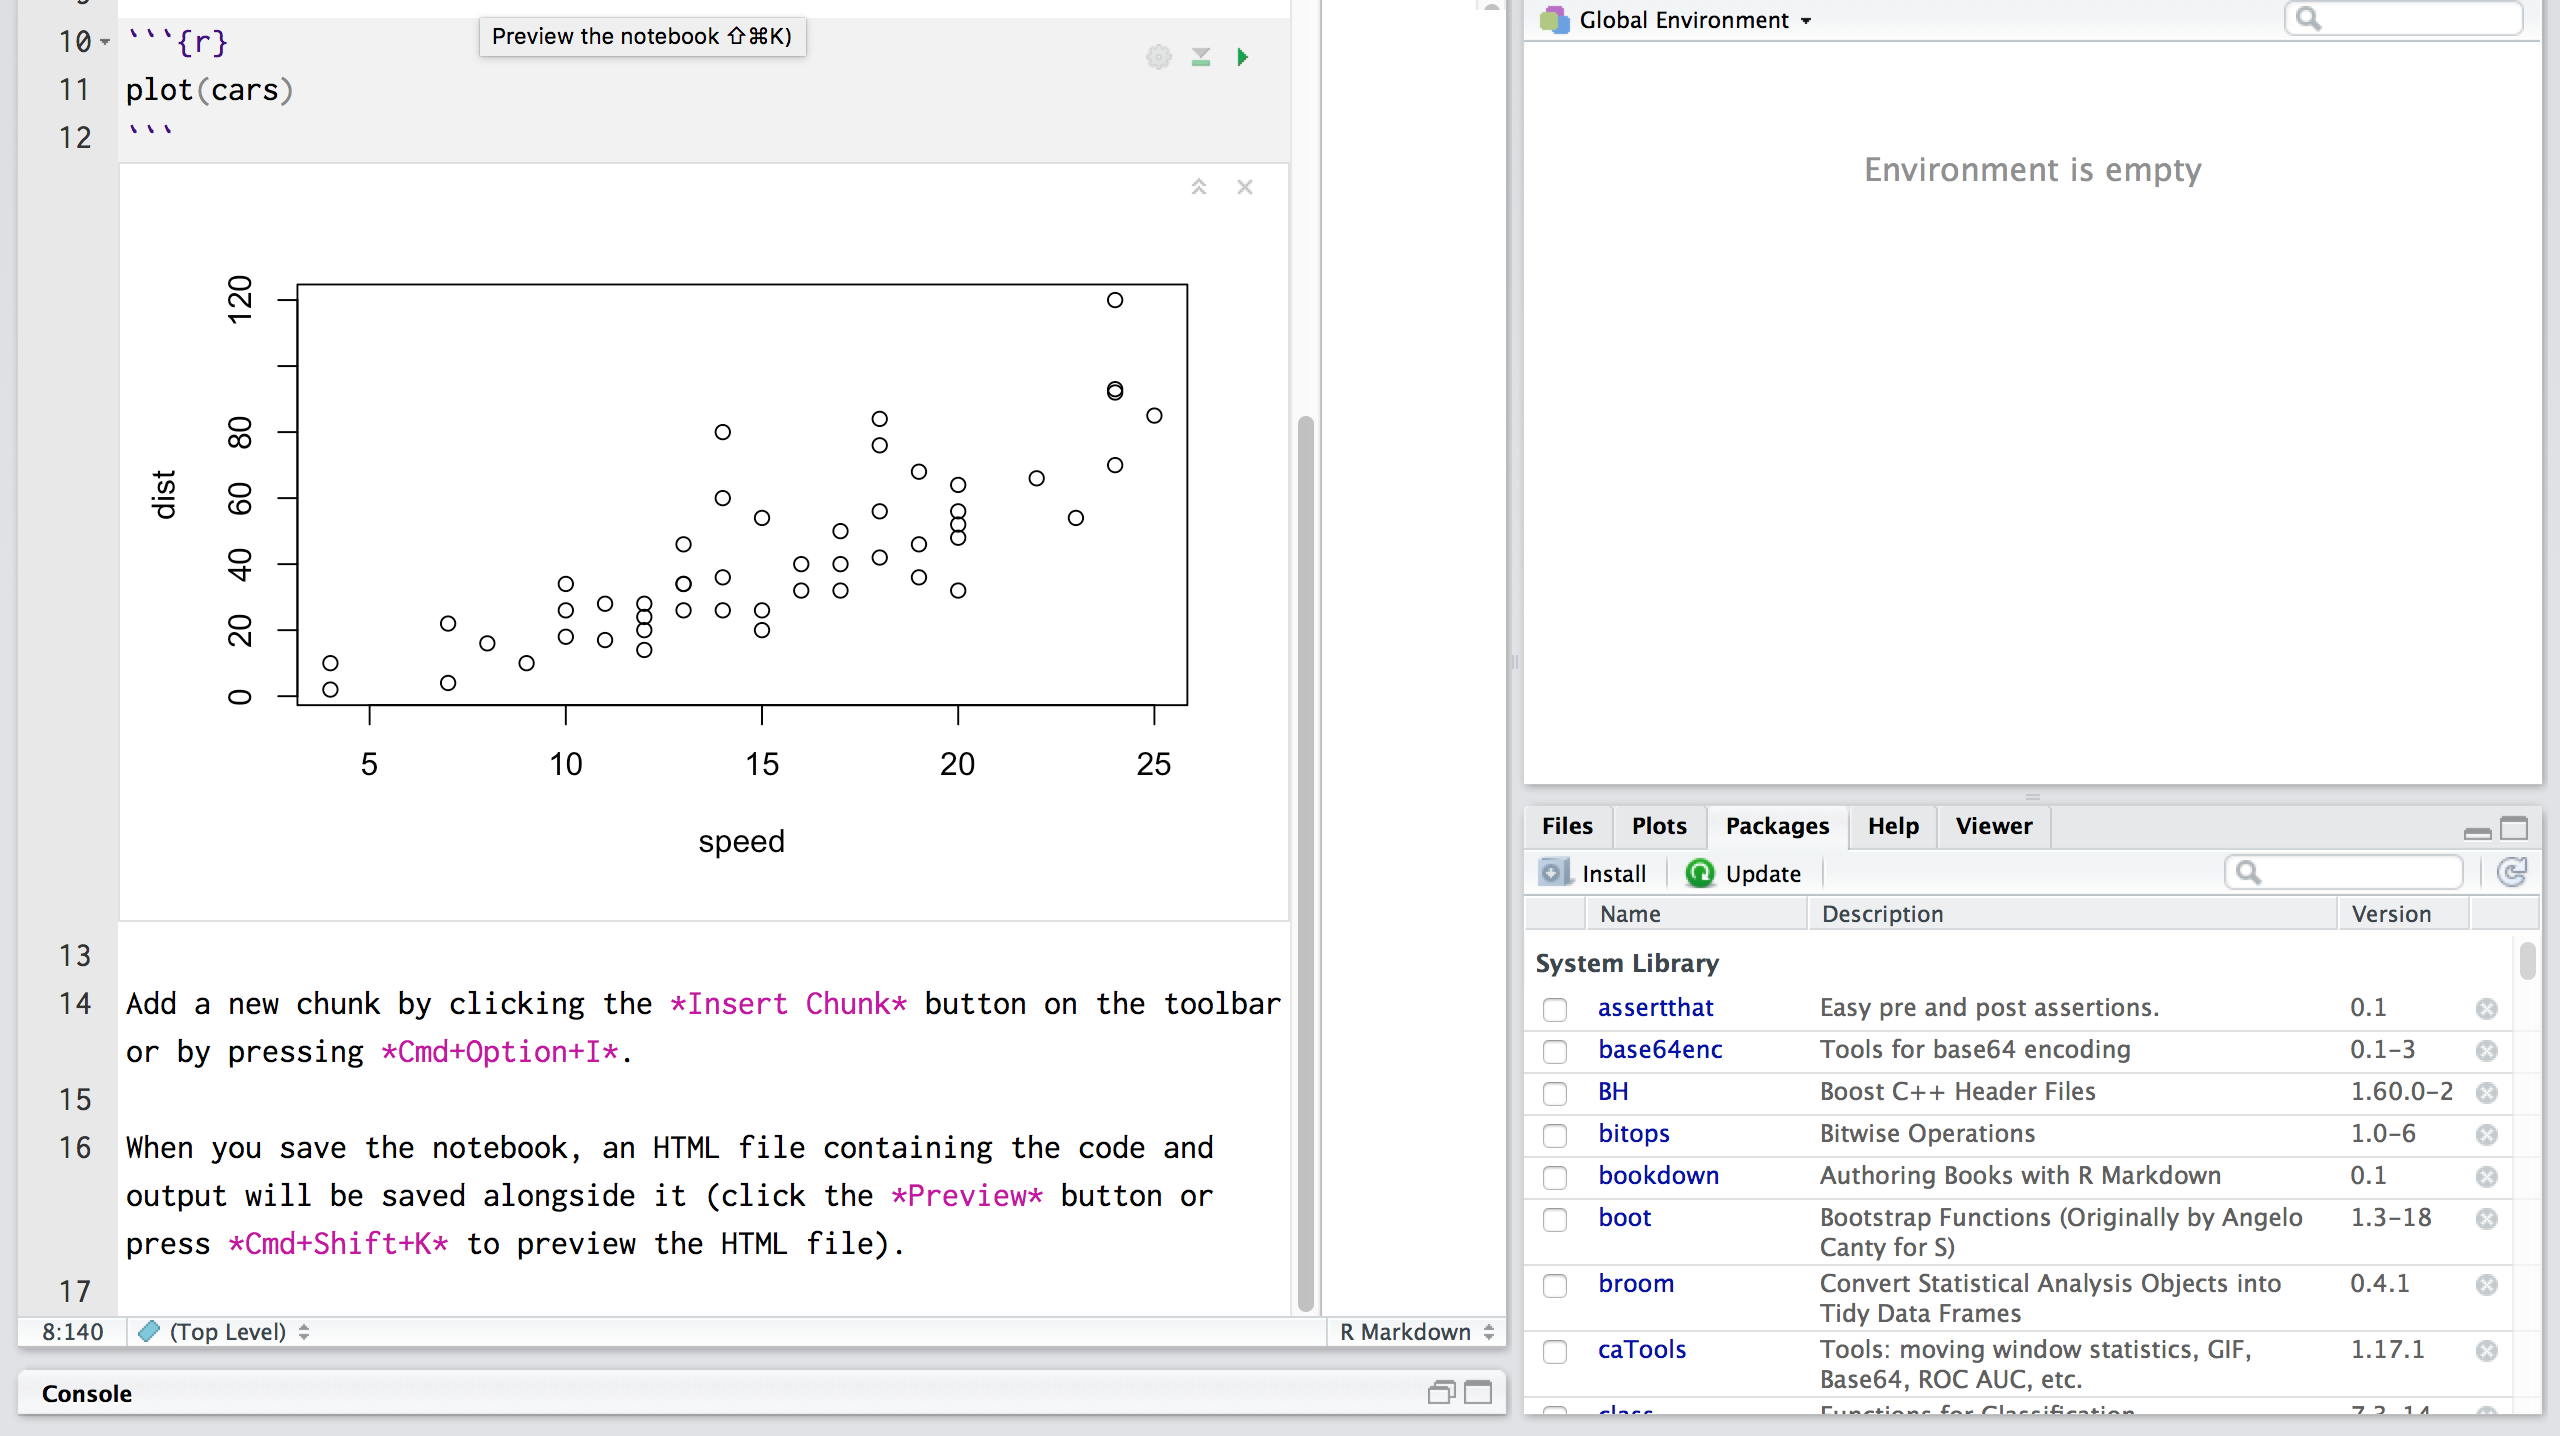 Getting Started With R in RStudio Notebooks